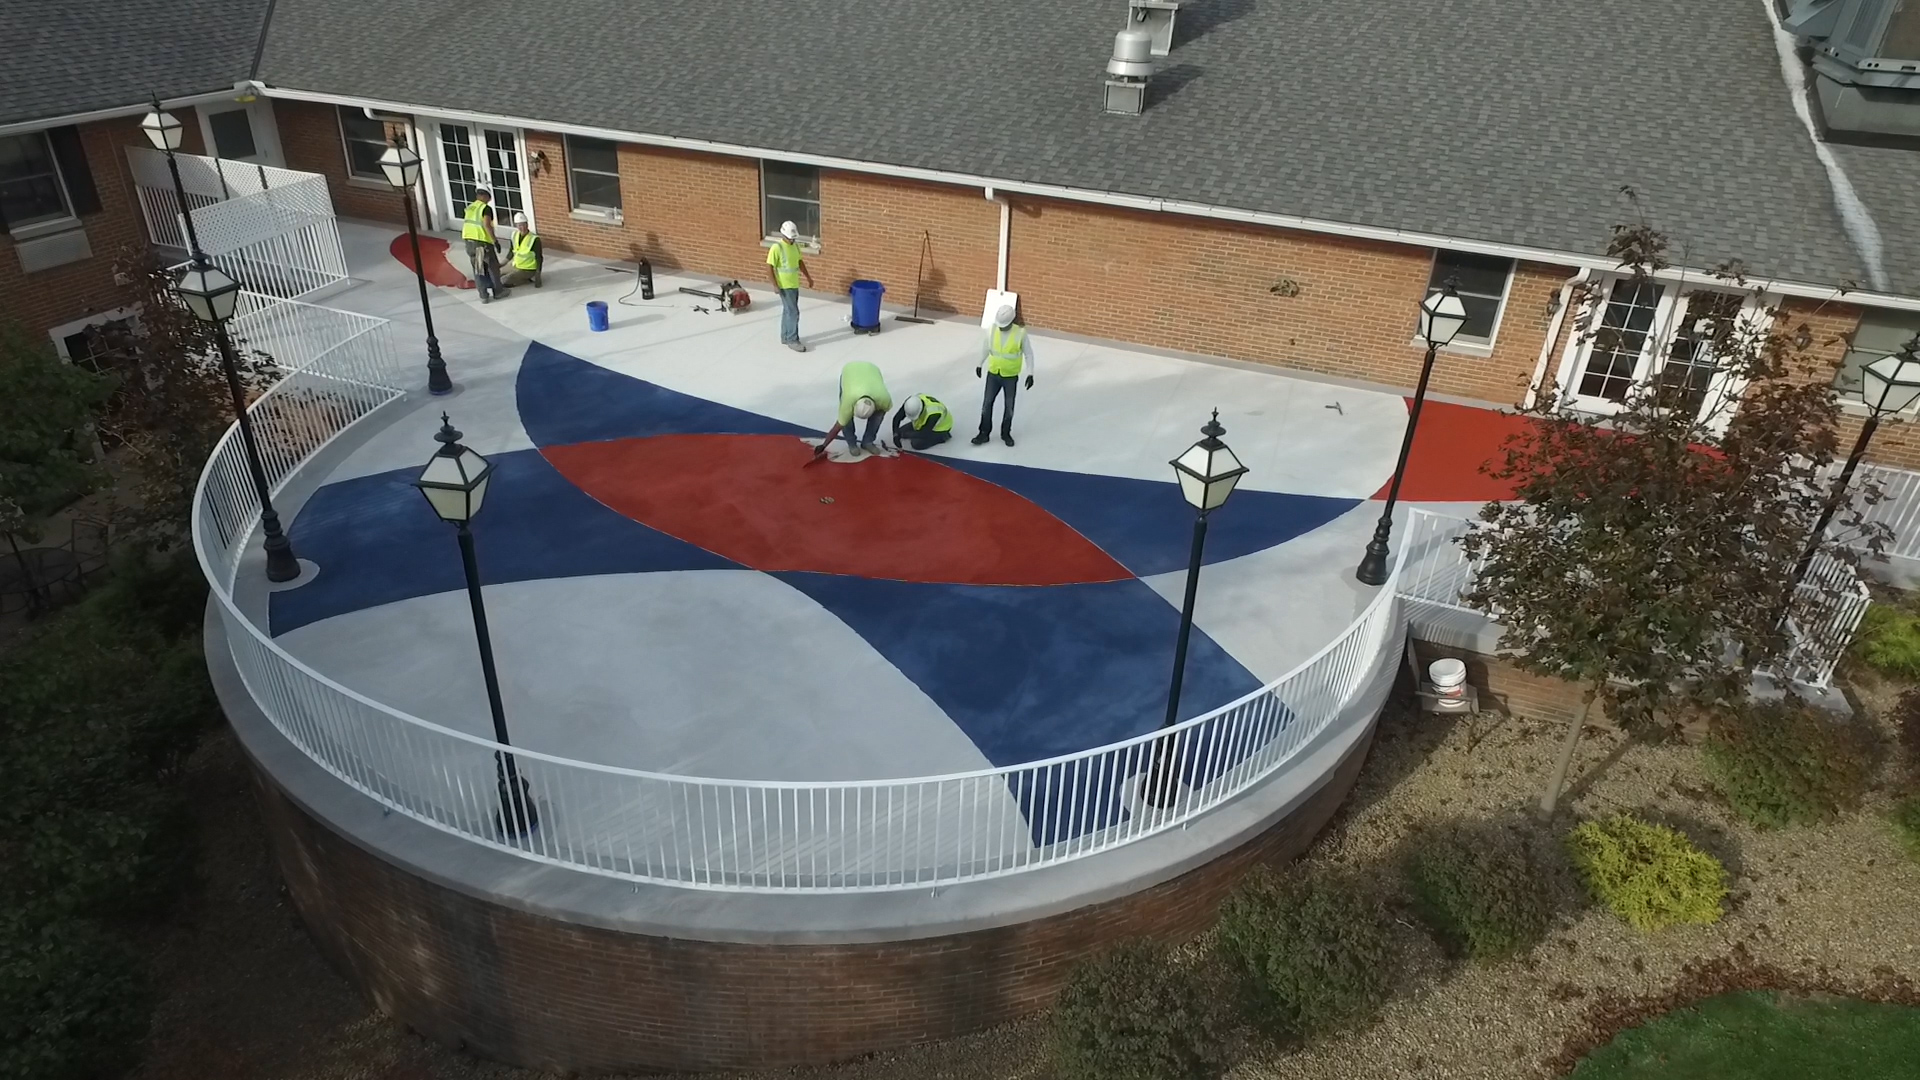 Volunteers from the Decorative Concrete Council (DCC) and the Manufacturers Advisory Council (MAC), traveled to Berea, Ohio, October 10  14 to install a new patio for the veterans and other residents of Northwest Healthcare Center. 